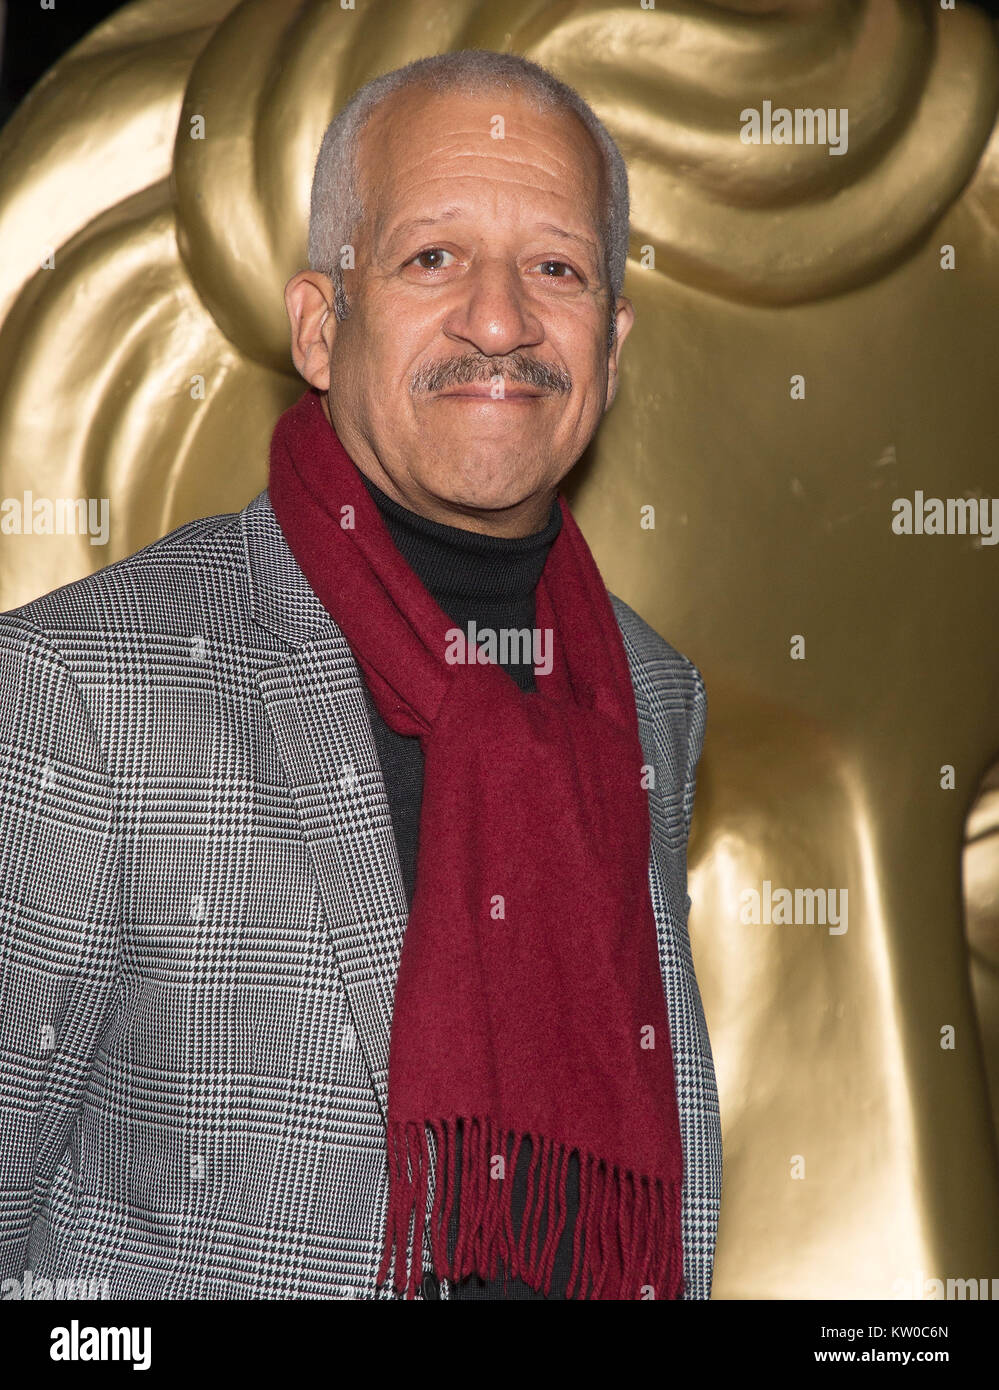 Derek griffiths actor hi-res stock photography and images - Alamy